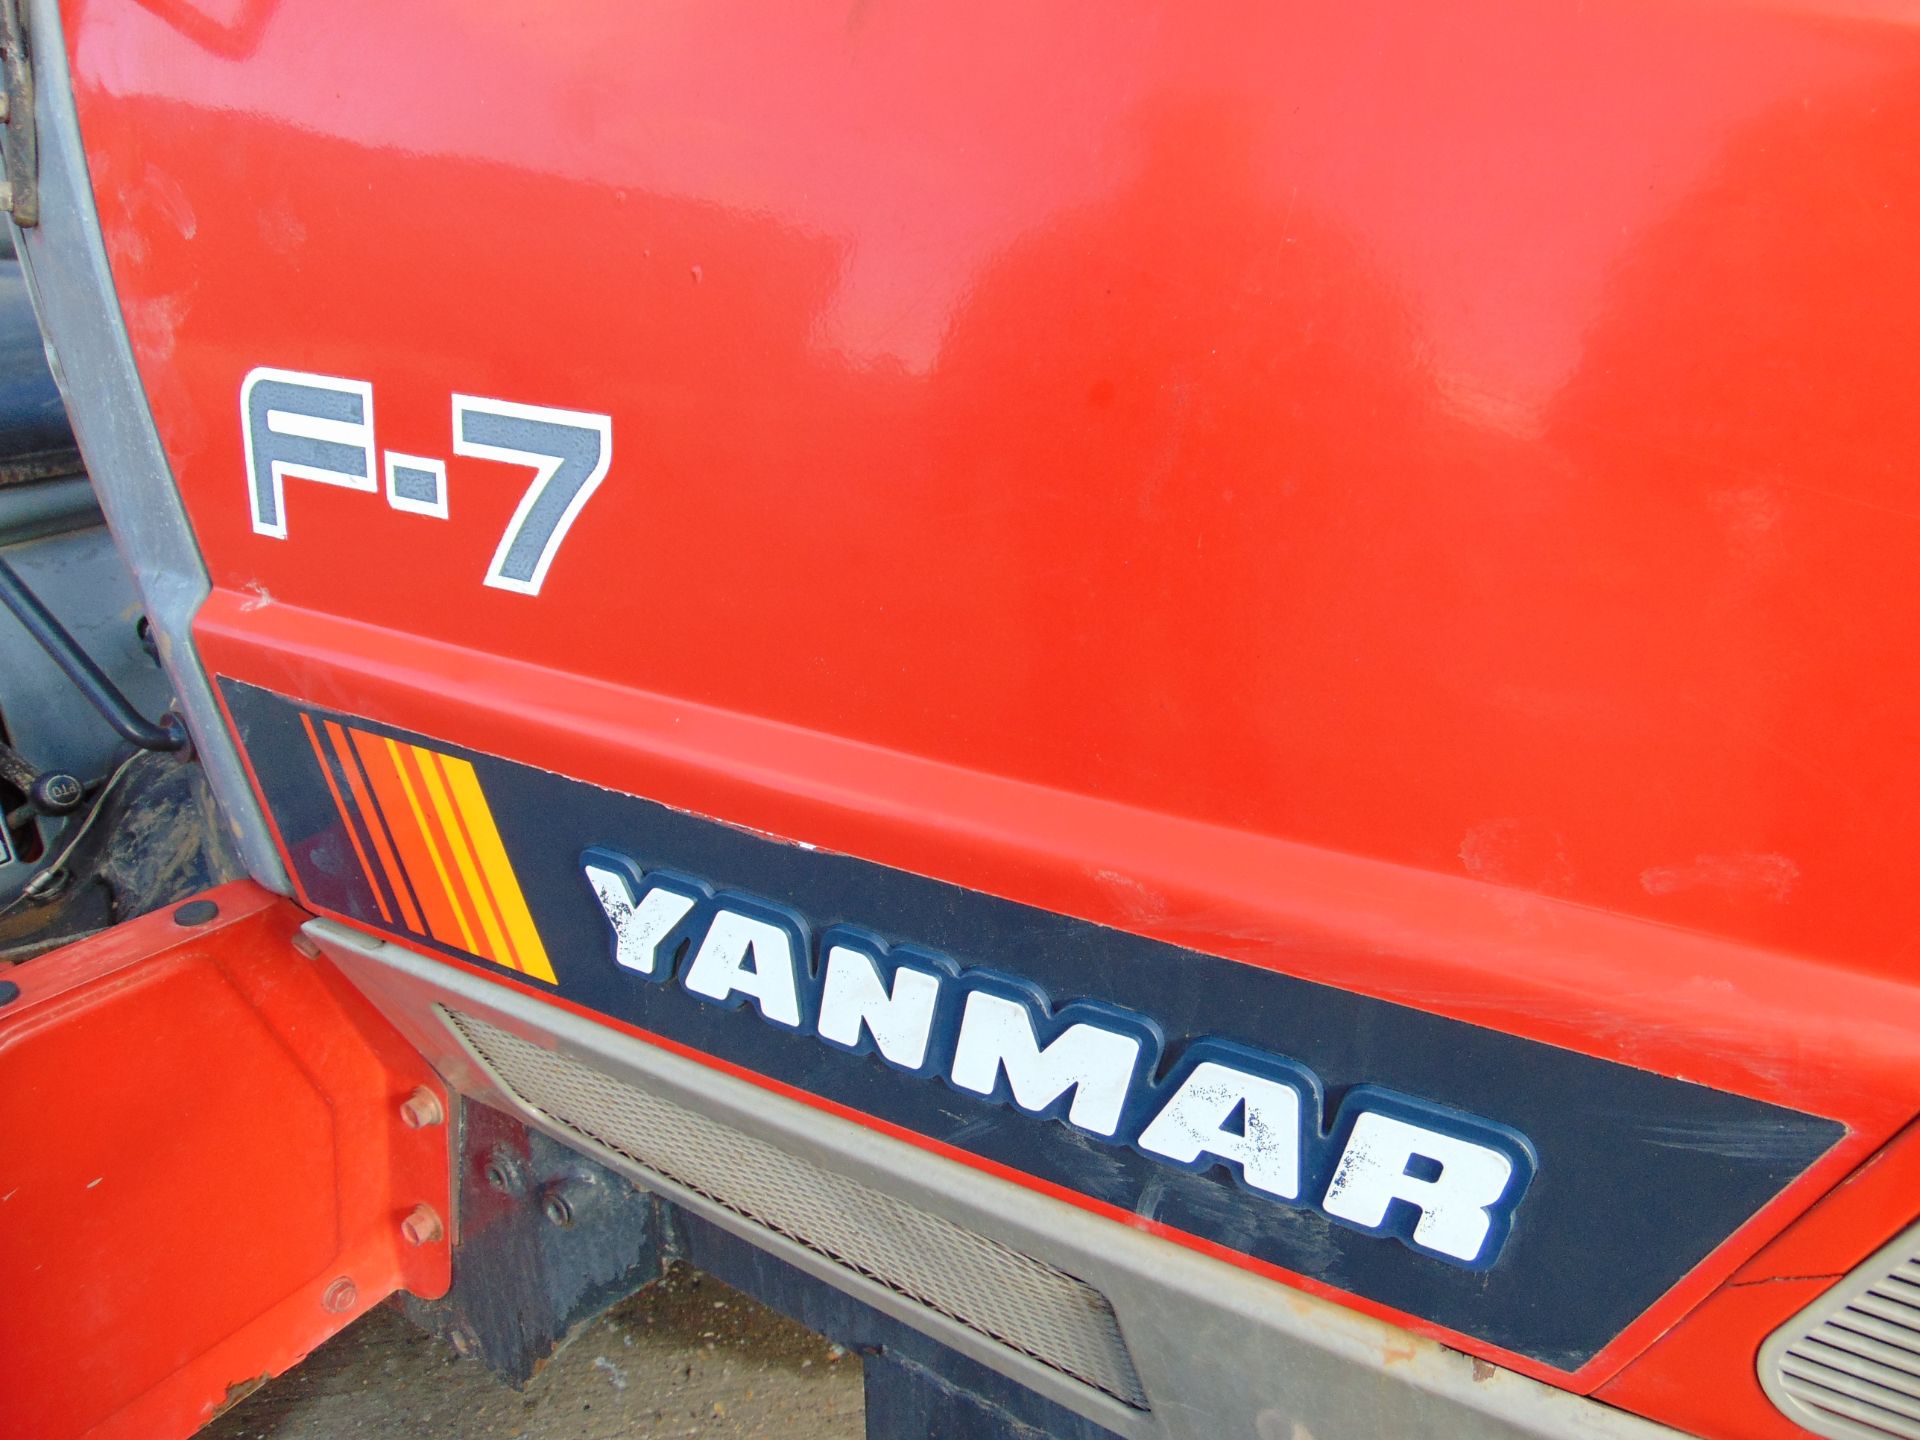 Yanmar F-7 4 x 4 Diesel Compact Tractor c/w RSA-1303 Rotorvator - Image 4 of 28